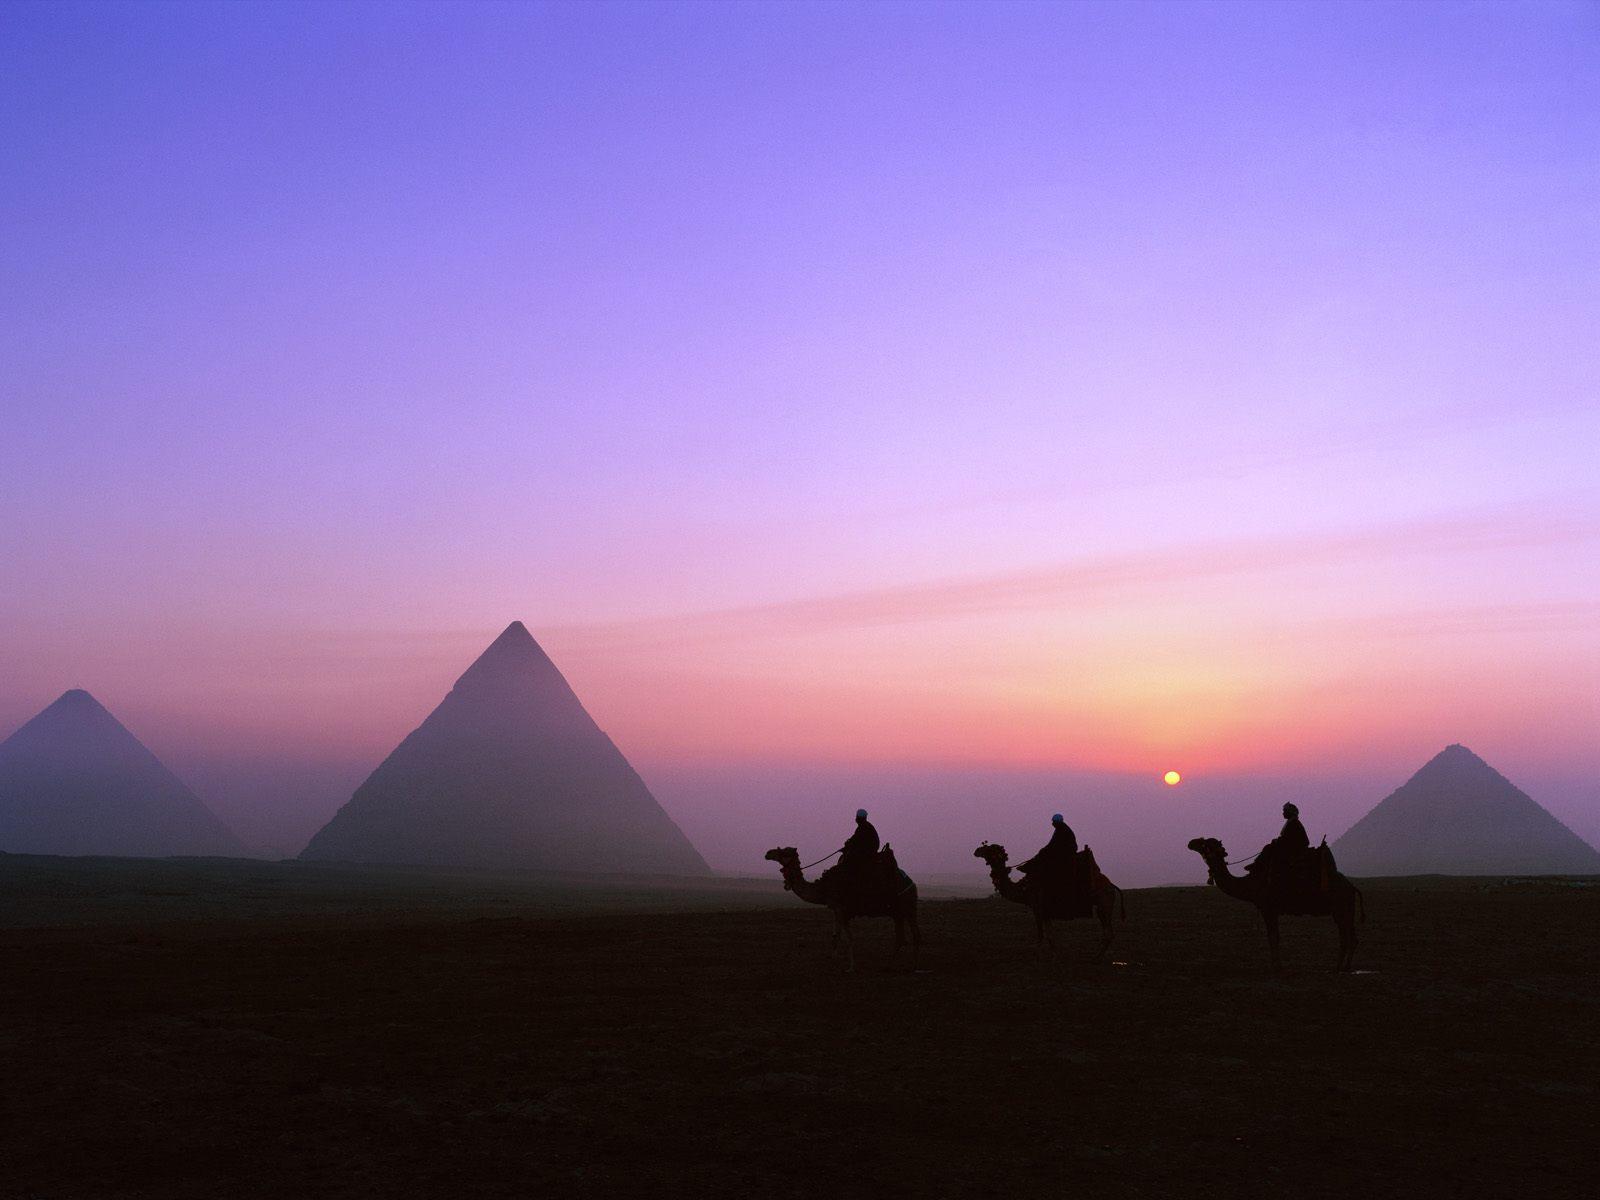 Egypt Picture - Pyramid Sunset Ancient Egypt - HD Wallpaper 